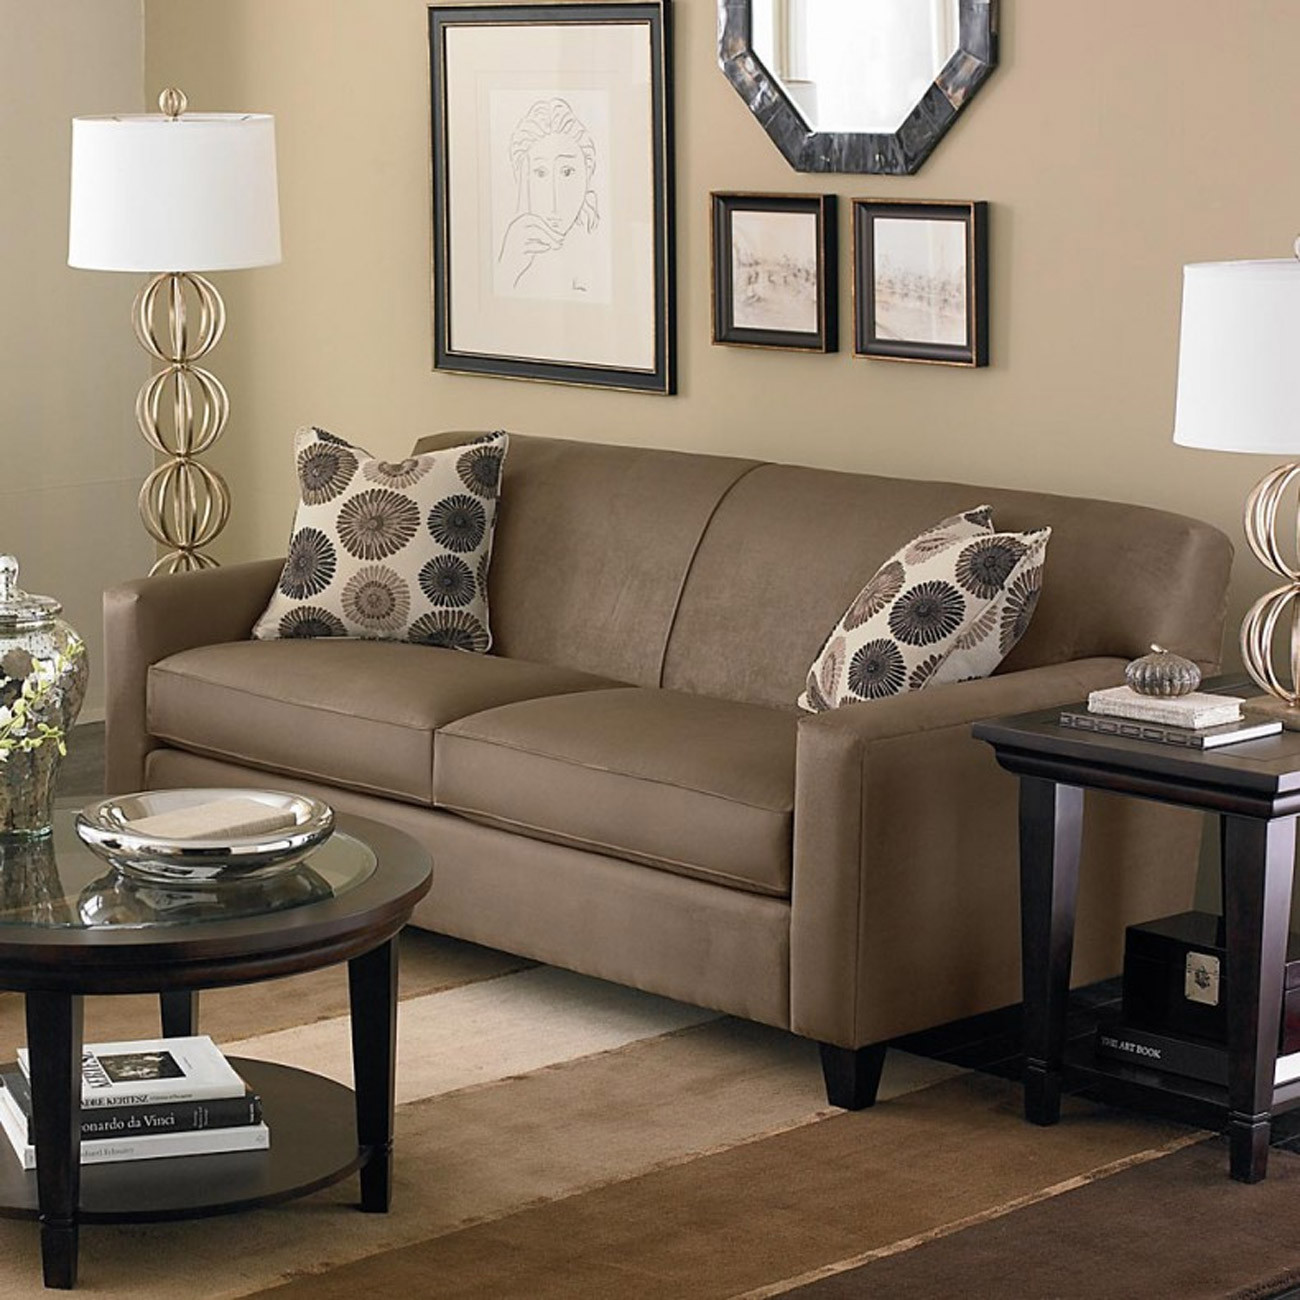 Brown Sectional Living Room Ideas
 Find Suitable Living Room Furniture With Your Style